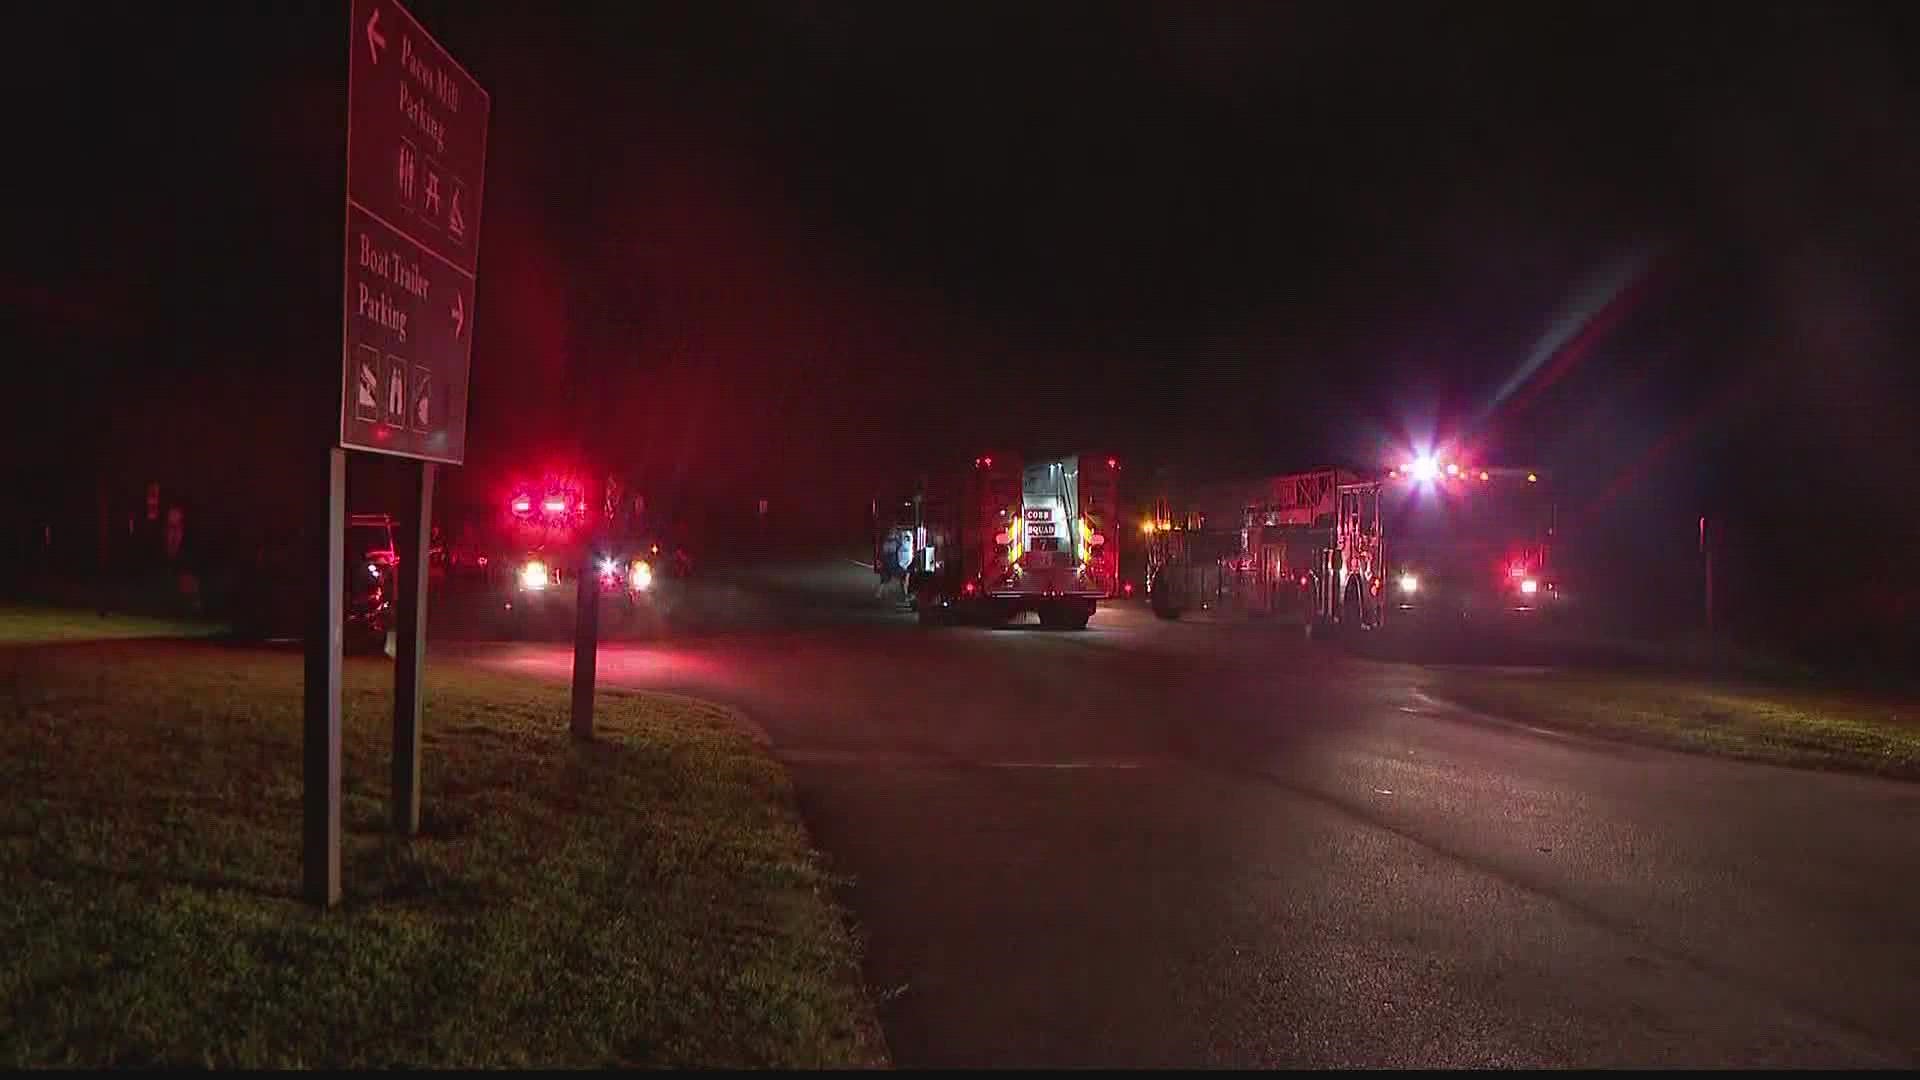 Several Atlanta Fire Rescue trucks were spotted just before 10 p.m. at the 2200-block of West Wesley Road NW in Atlanta's Paces neighborhood.